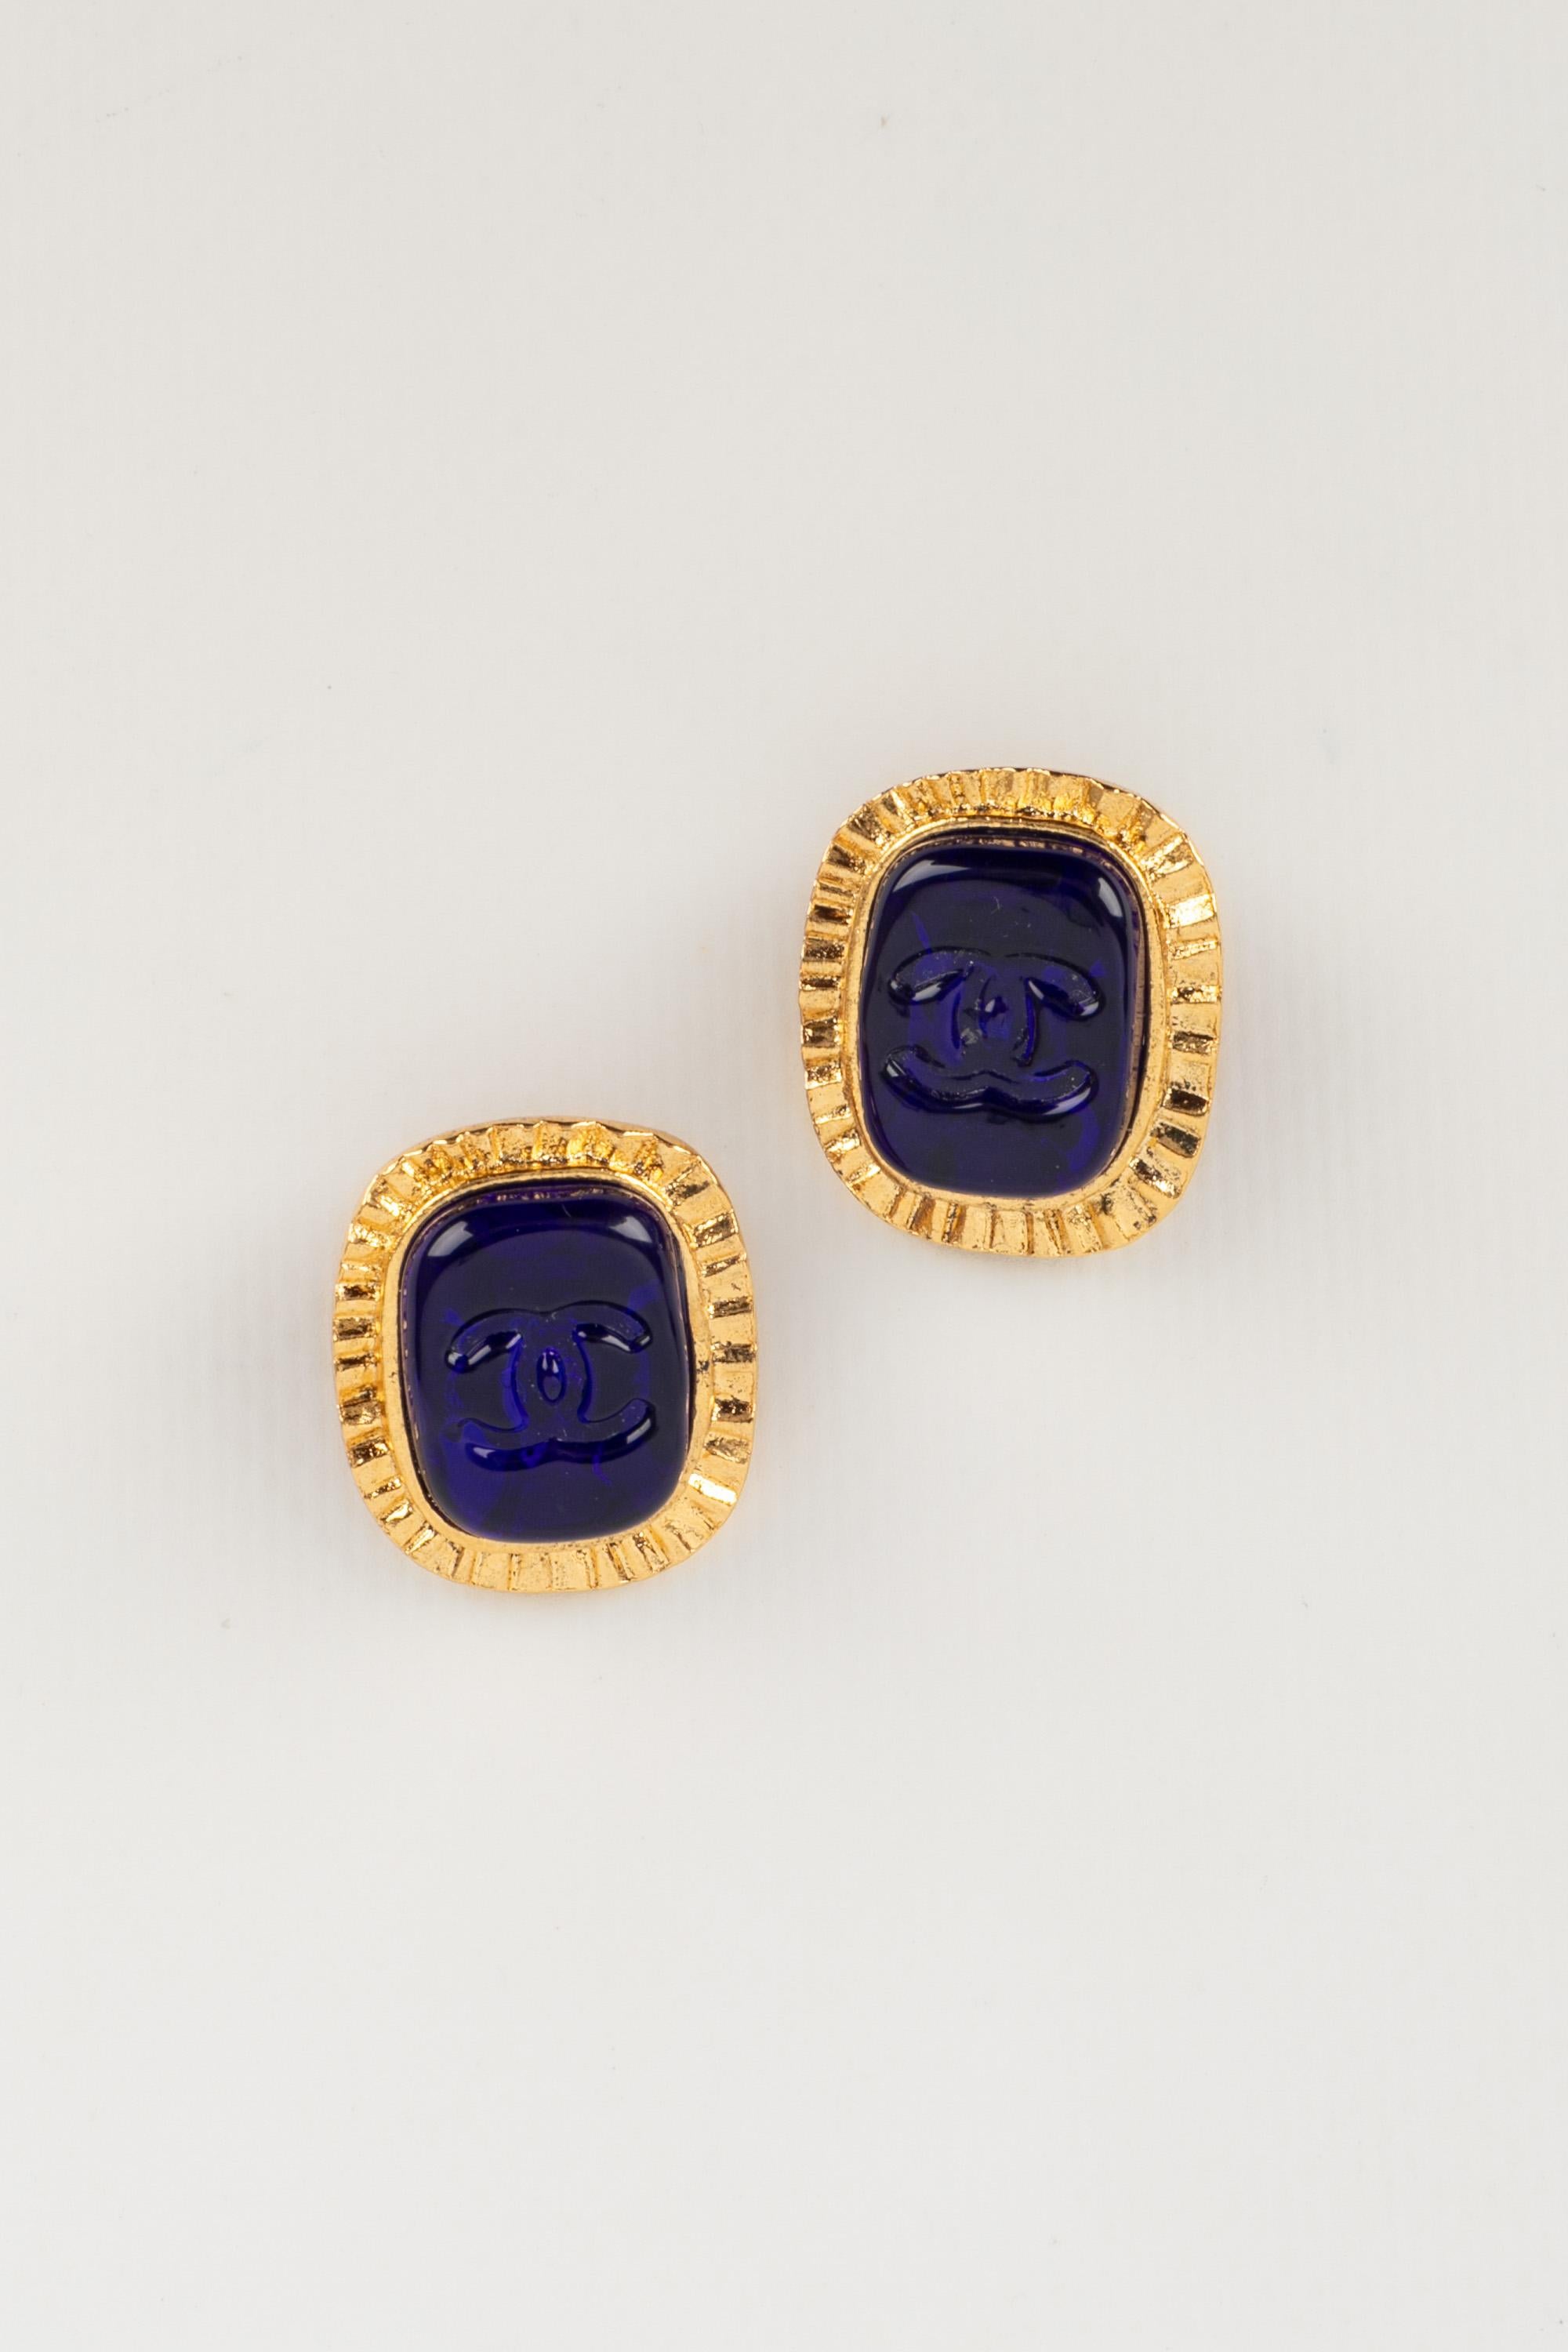 CHANEL - (Made in France) Golden metal clip-on earrings topped with a blue glass paste cabochon. 1995 Spring-Summer Collection.

Condition:
Very good condition

Dimensions:
Height: 3 cm

BOB66